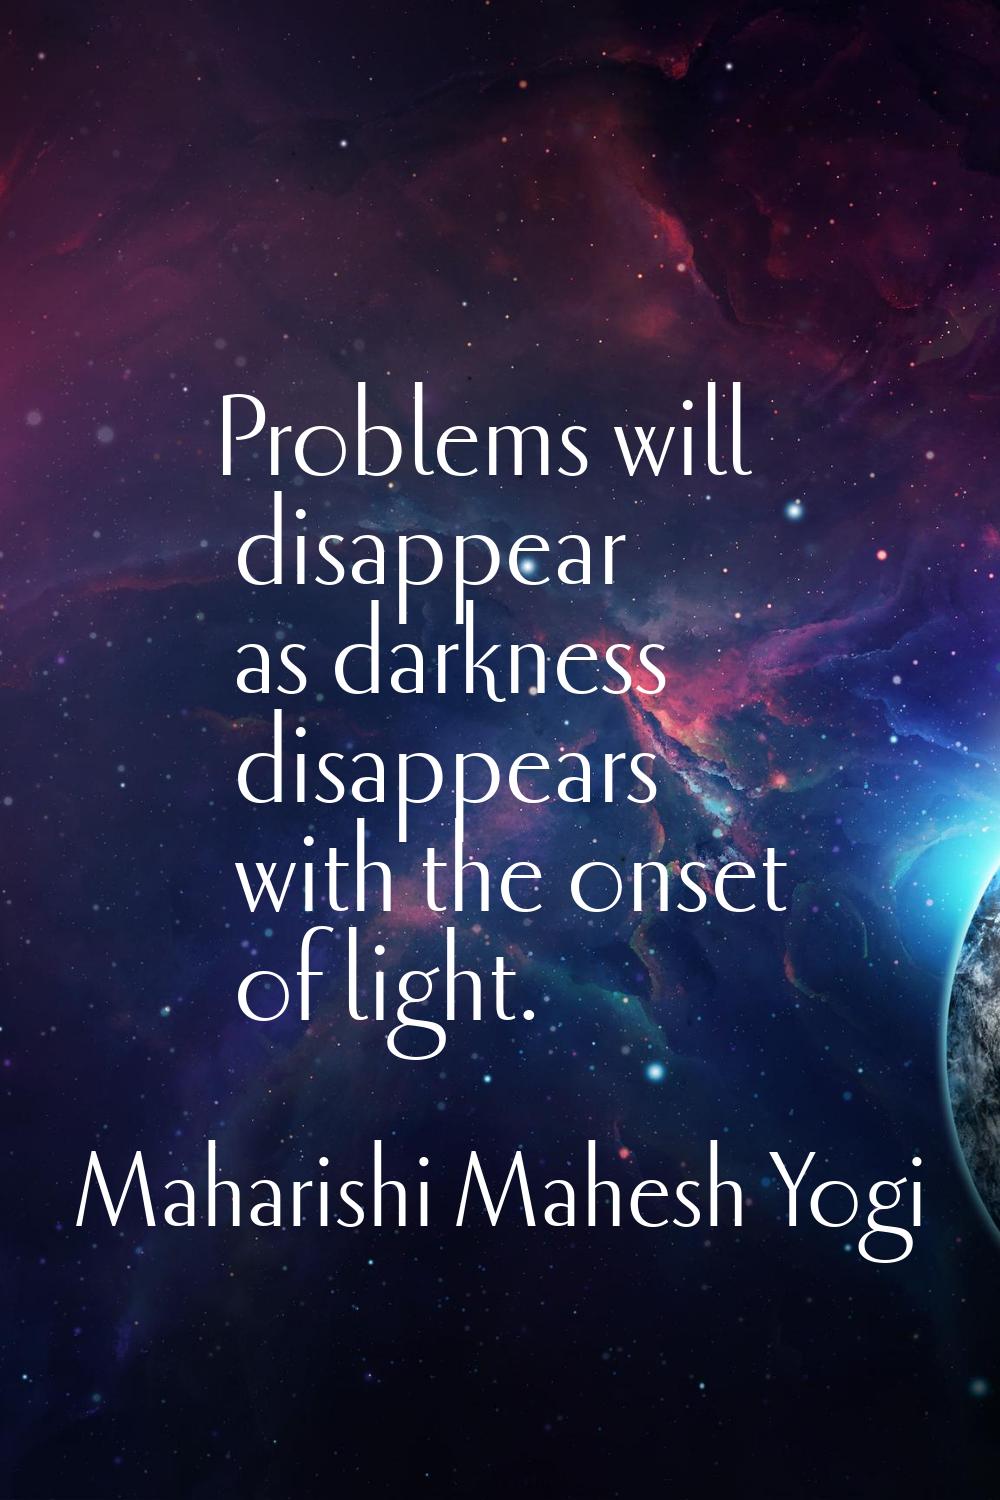 Problems will disappear as darkness disappears with the onset of light.